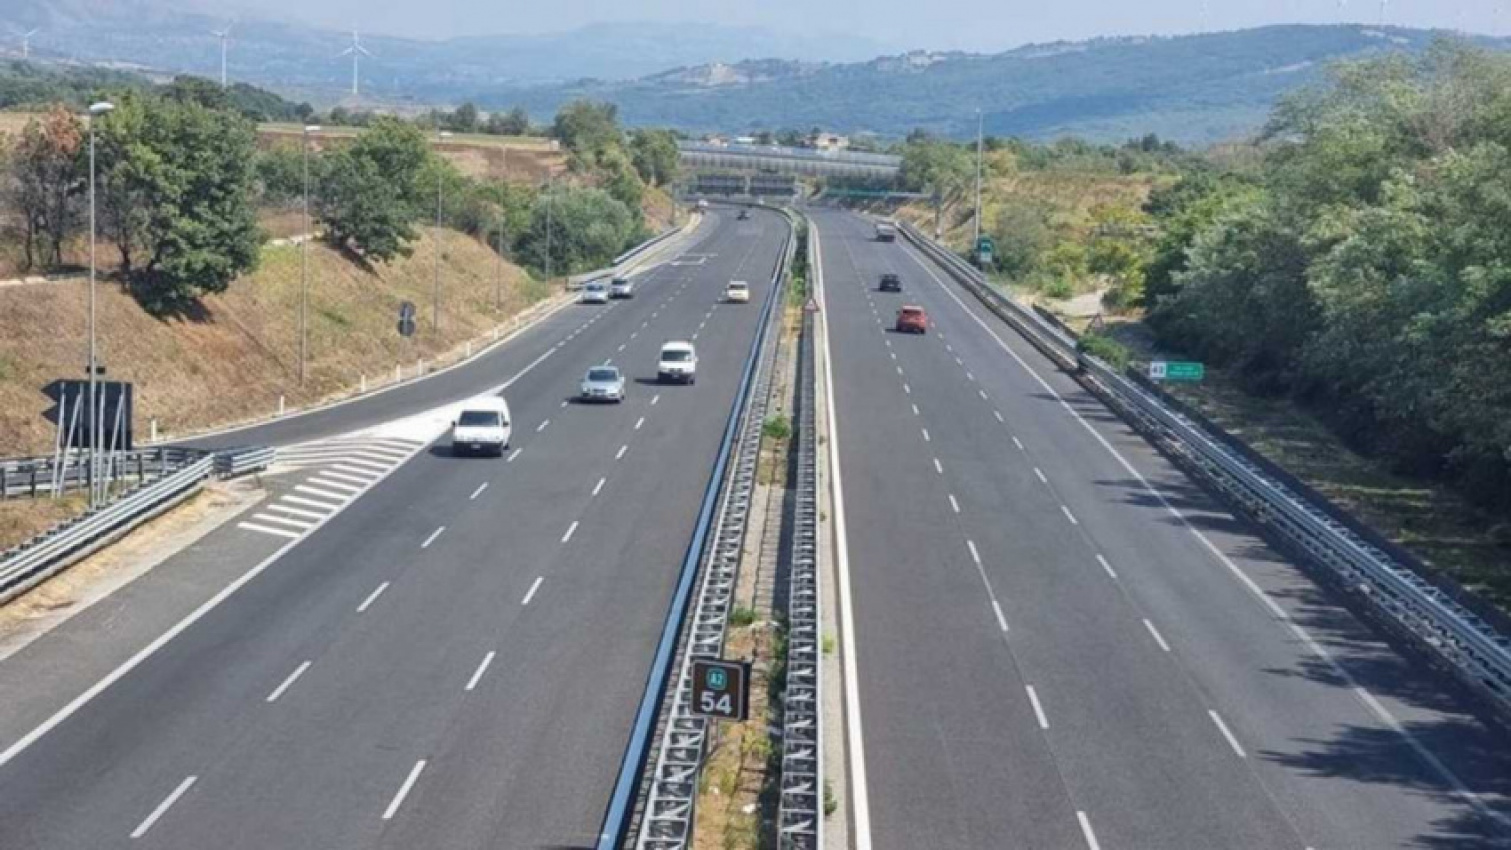 autos, cars, smart, salerno-reggio calabria in italy set to be europe’s longest smart road